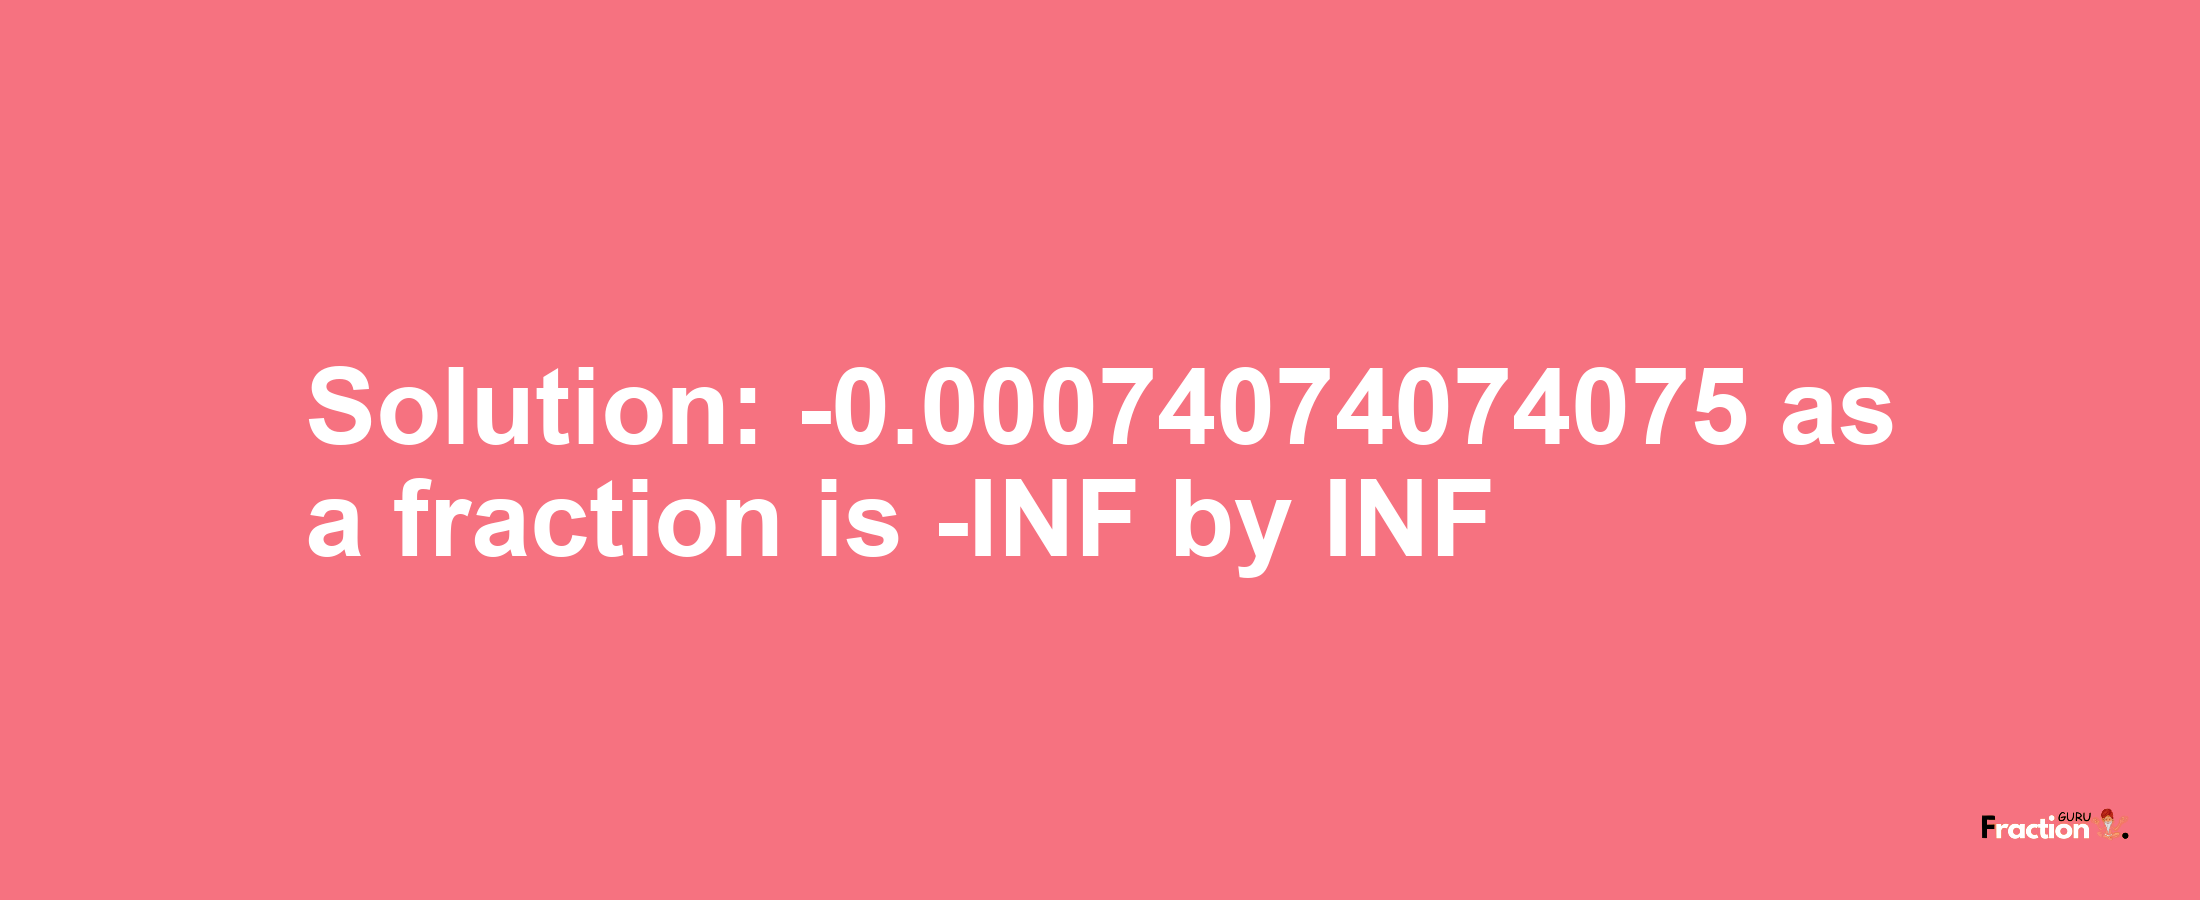 Solution:-0.00074074074075 as a fraction is -INF/INF